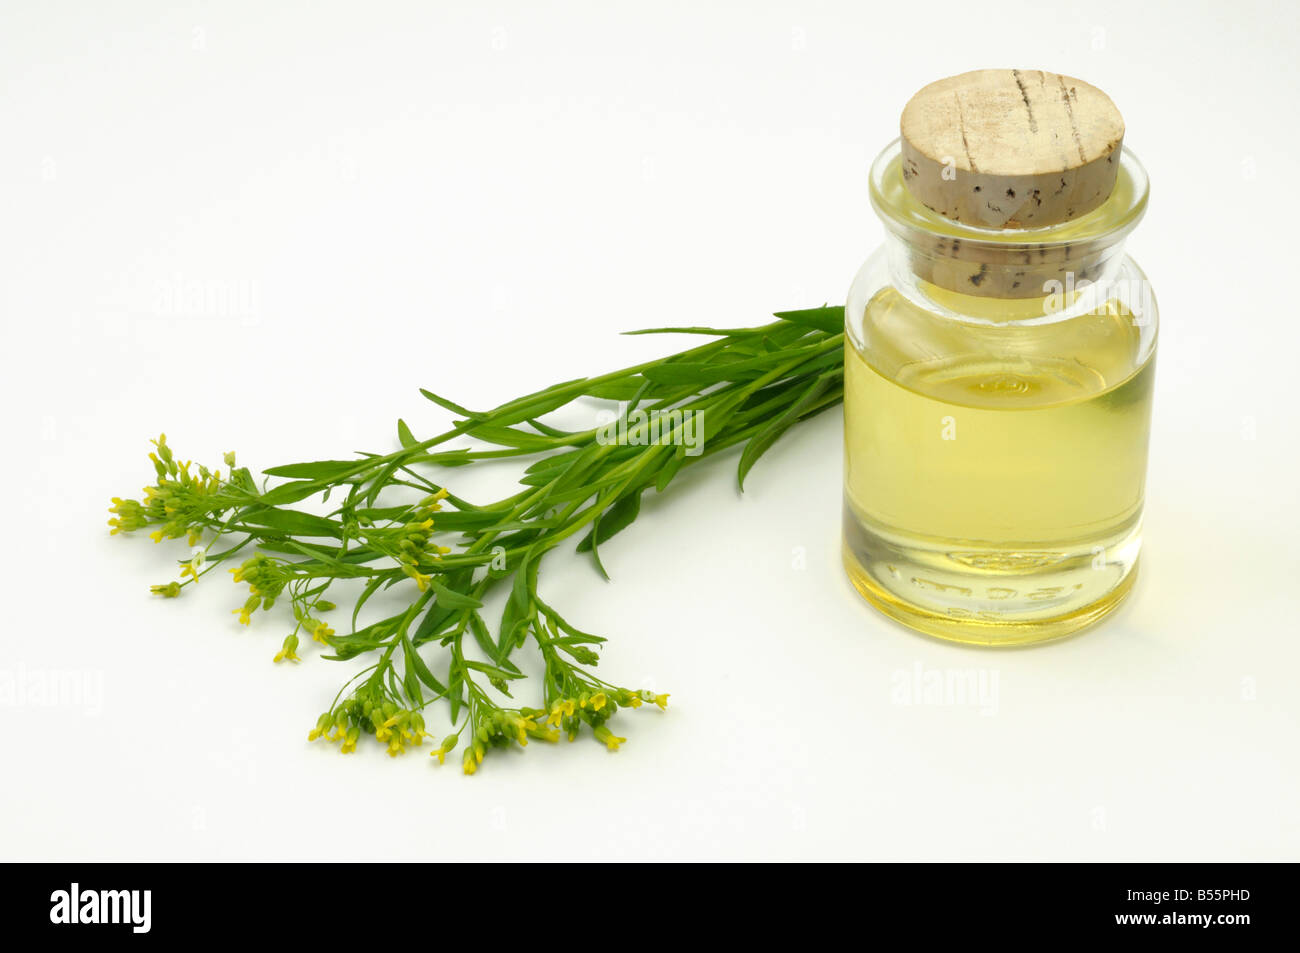 Bigseed False Flax, Wild Flax (Camelina sativa) flowering stems and a bottle of oil studio picture Stock Photo